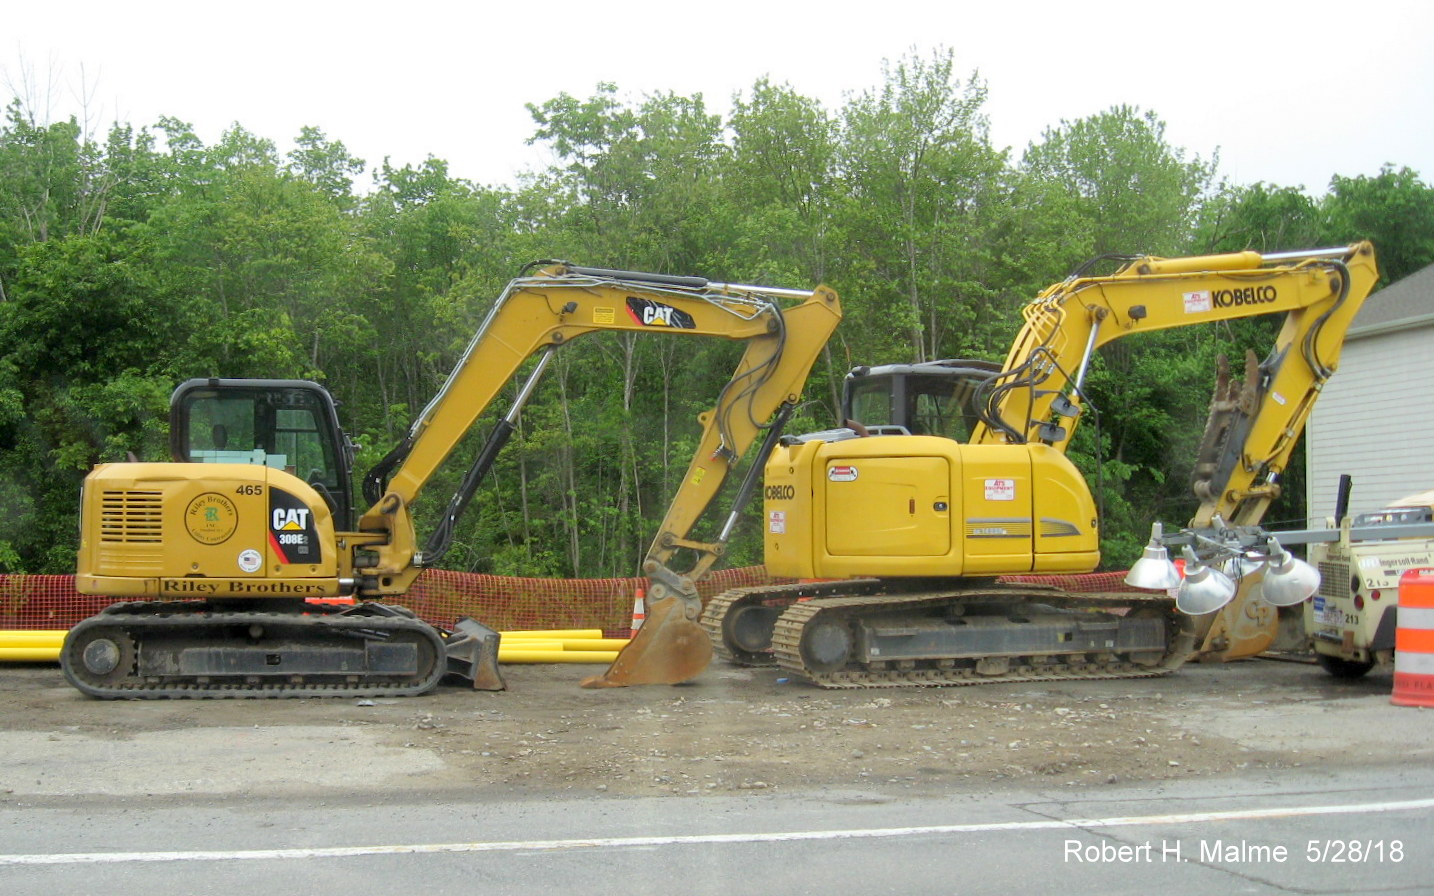 Image of construction equipment for widening project stored along MA 18 South in Weymouth